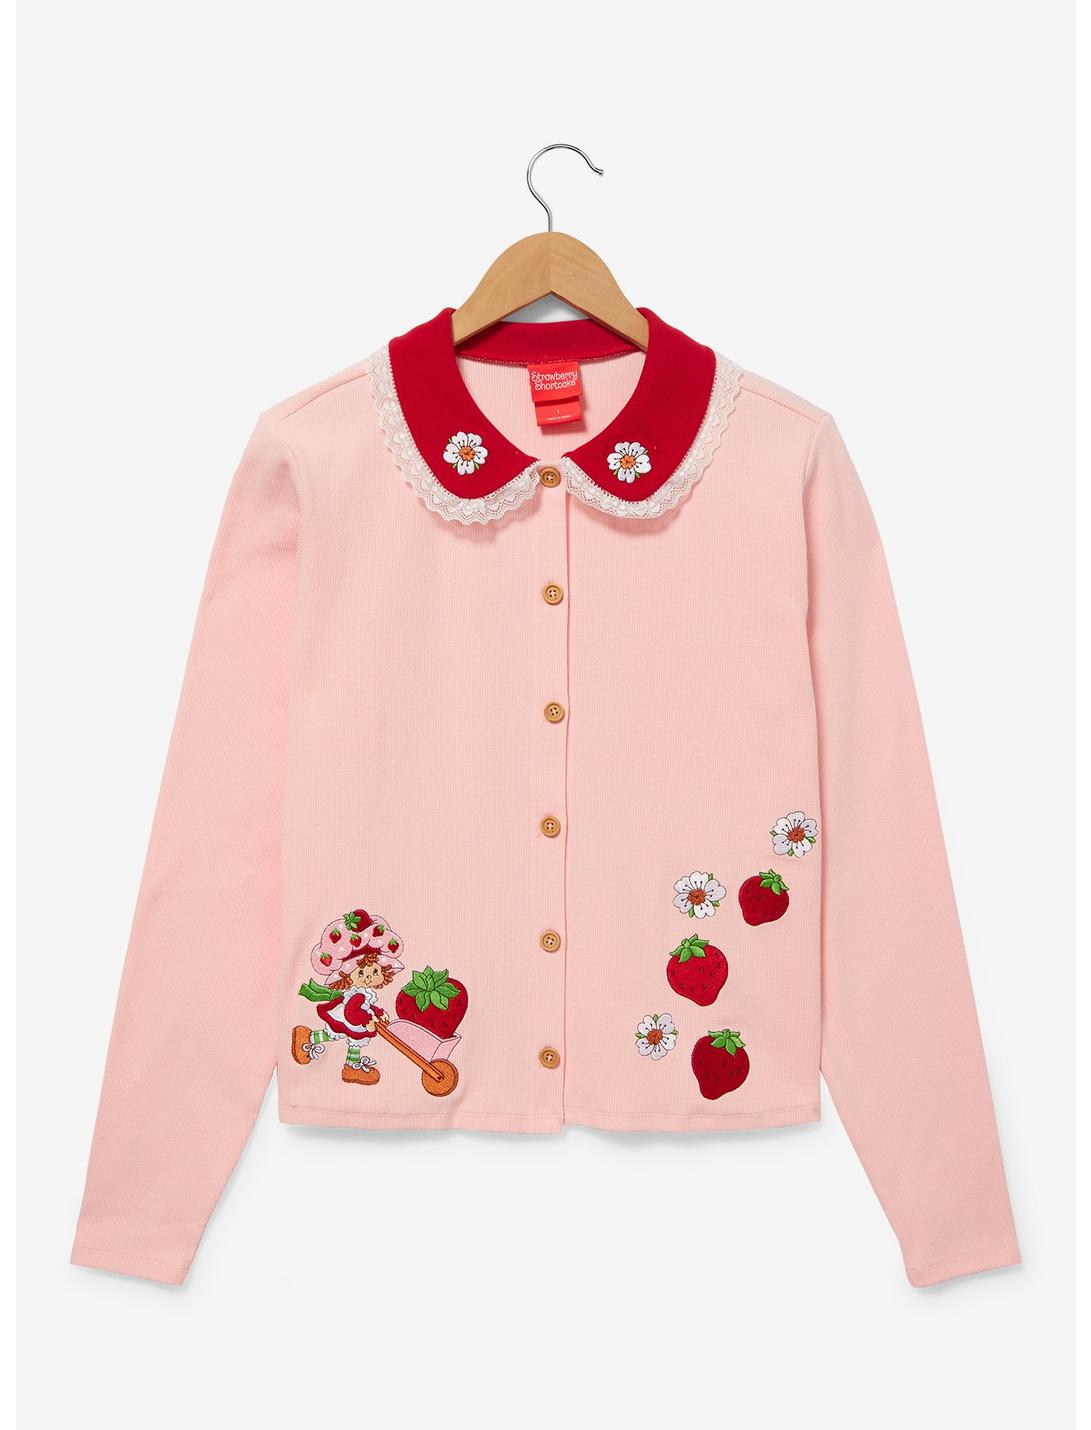 Strawberry Shortcake Portrait Collared Women's Plus Size Cardigan - BoxLunch Exclusive, LIGHT PINK, hi-res